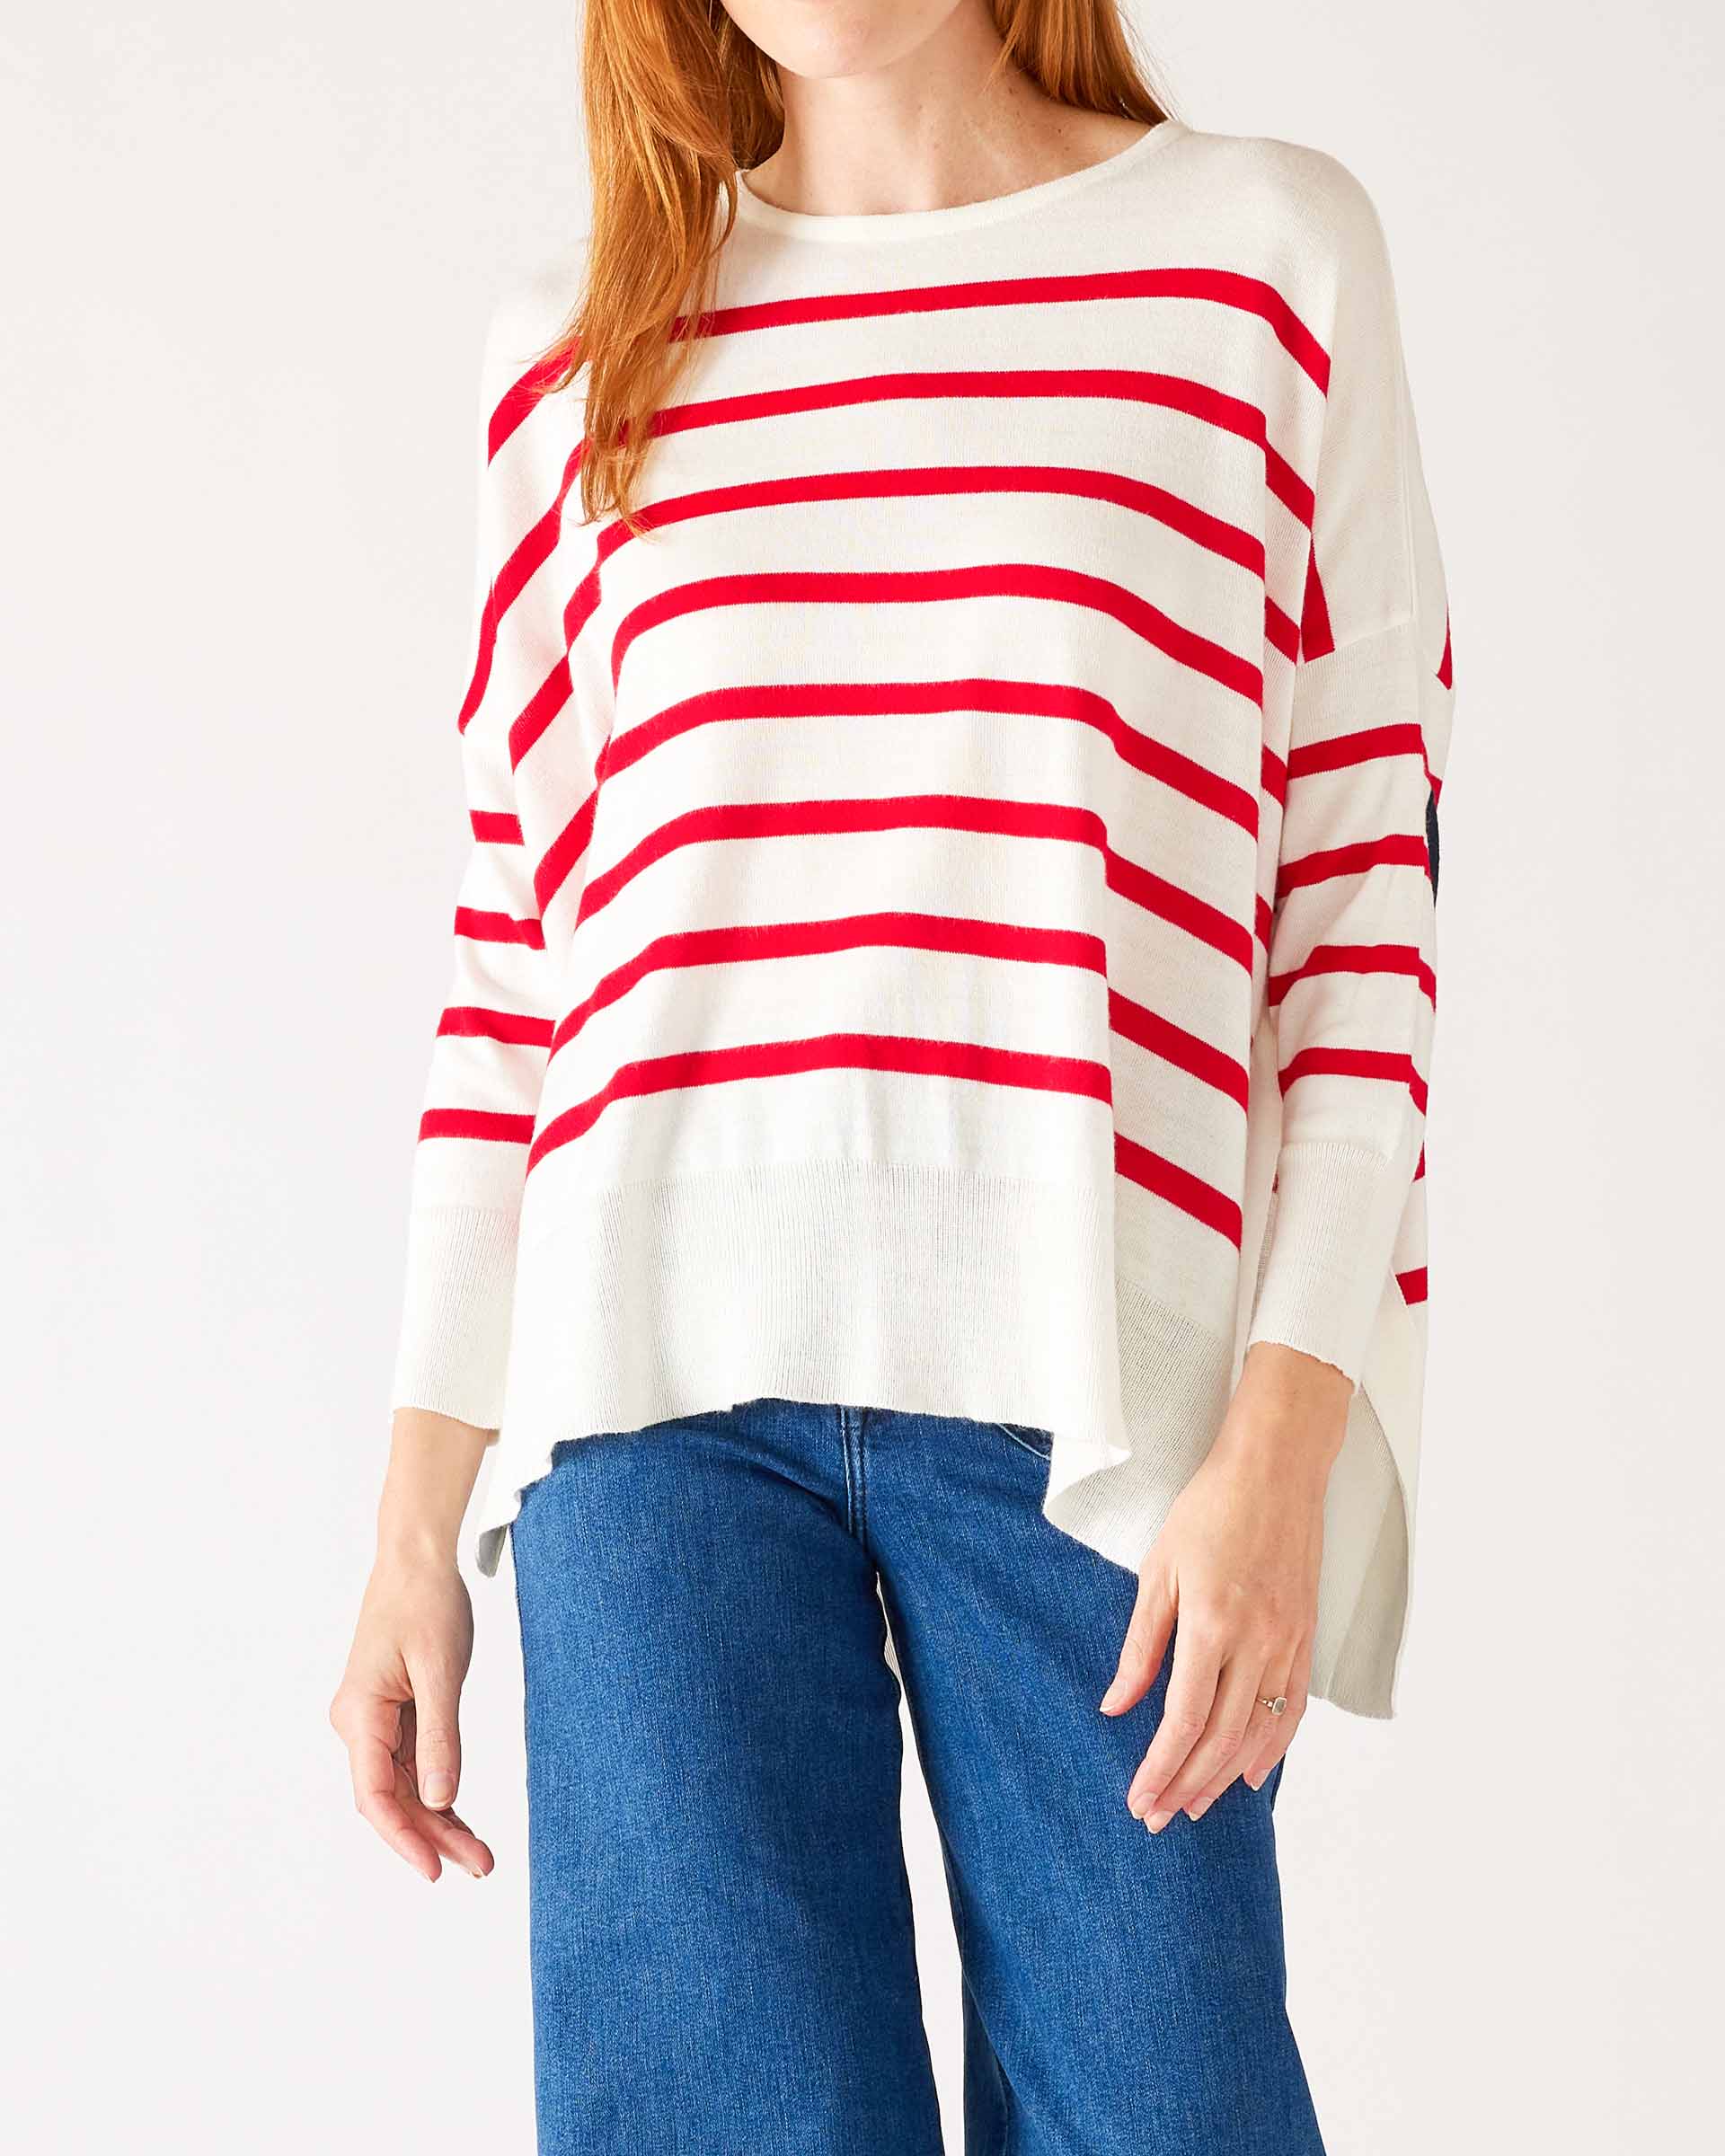 Women's One Size Red Striped Sweater with Blue Hearts on Sleeve Chest View